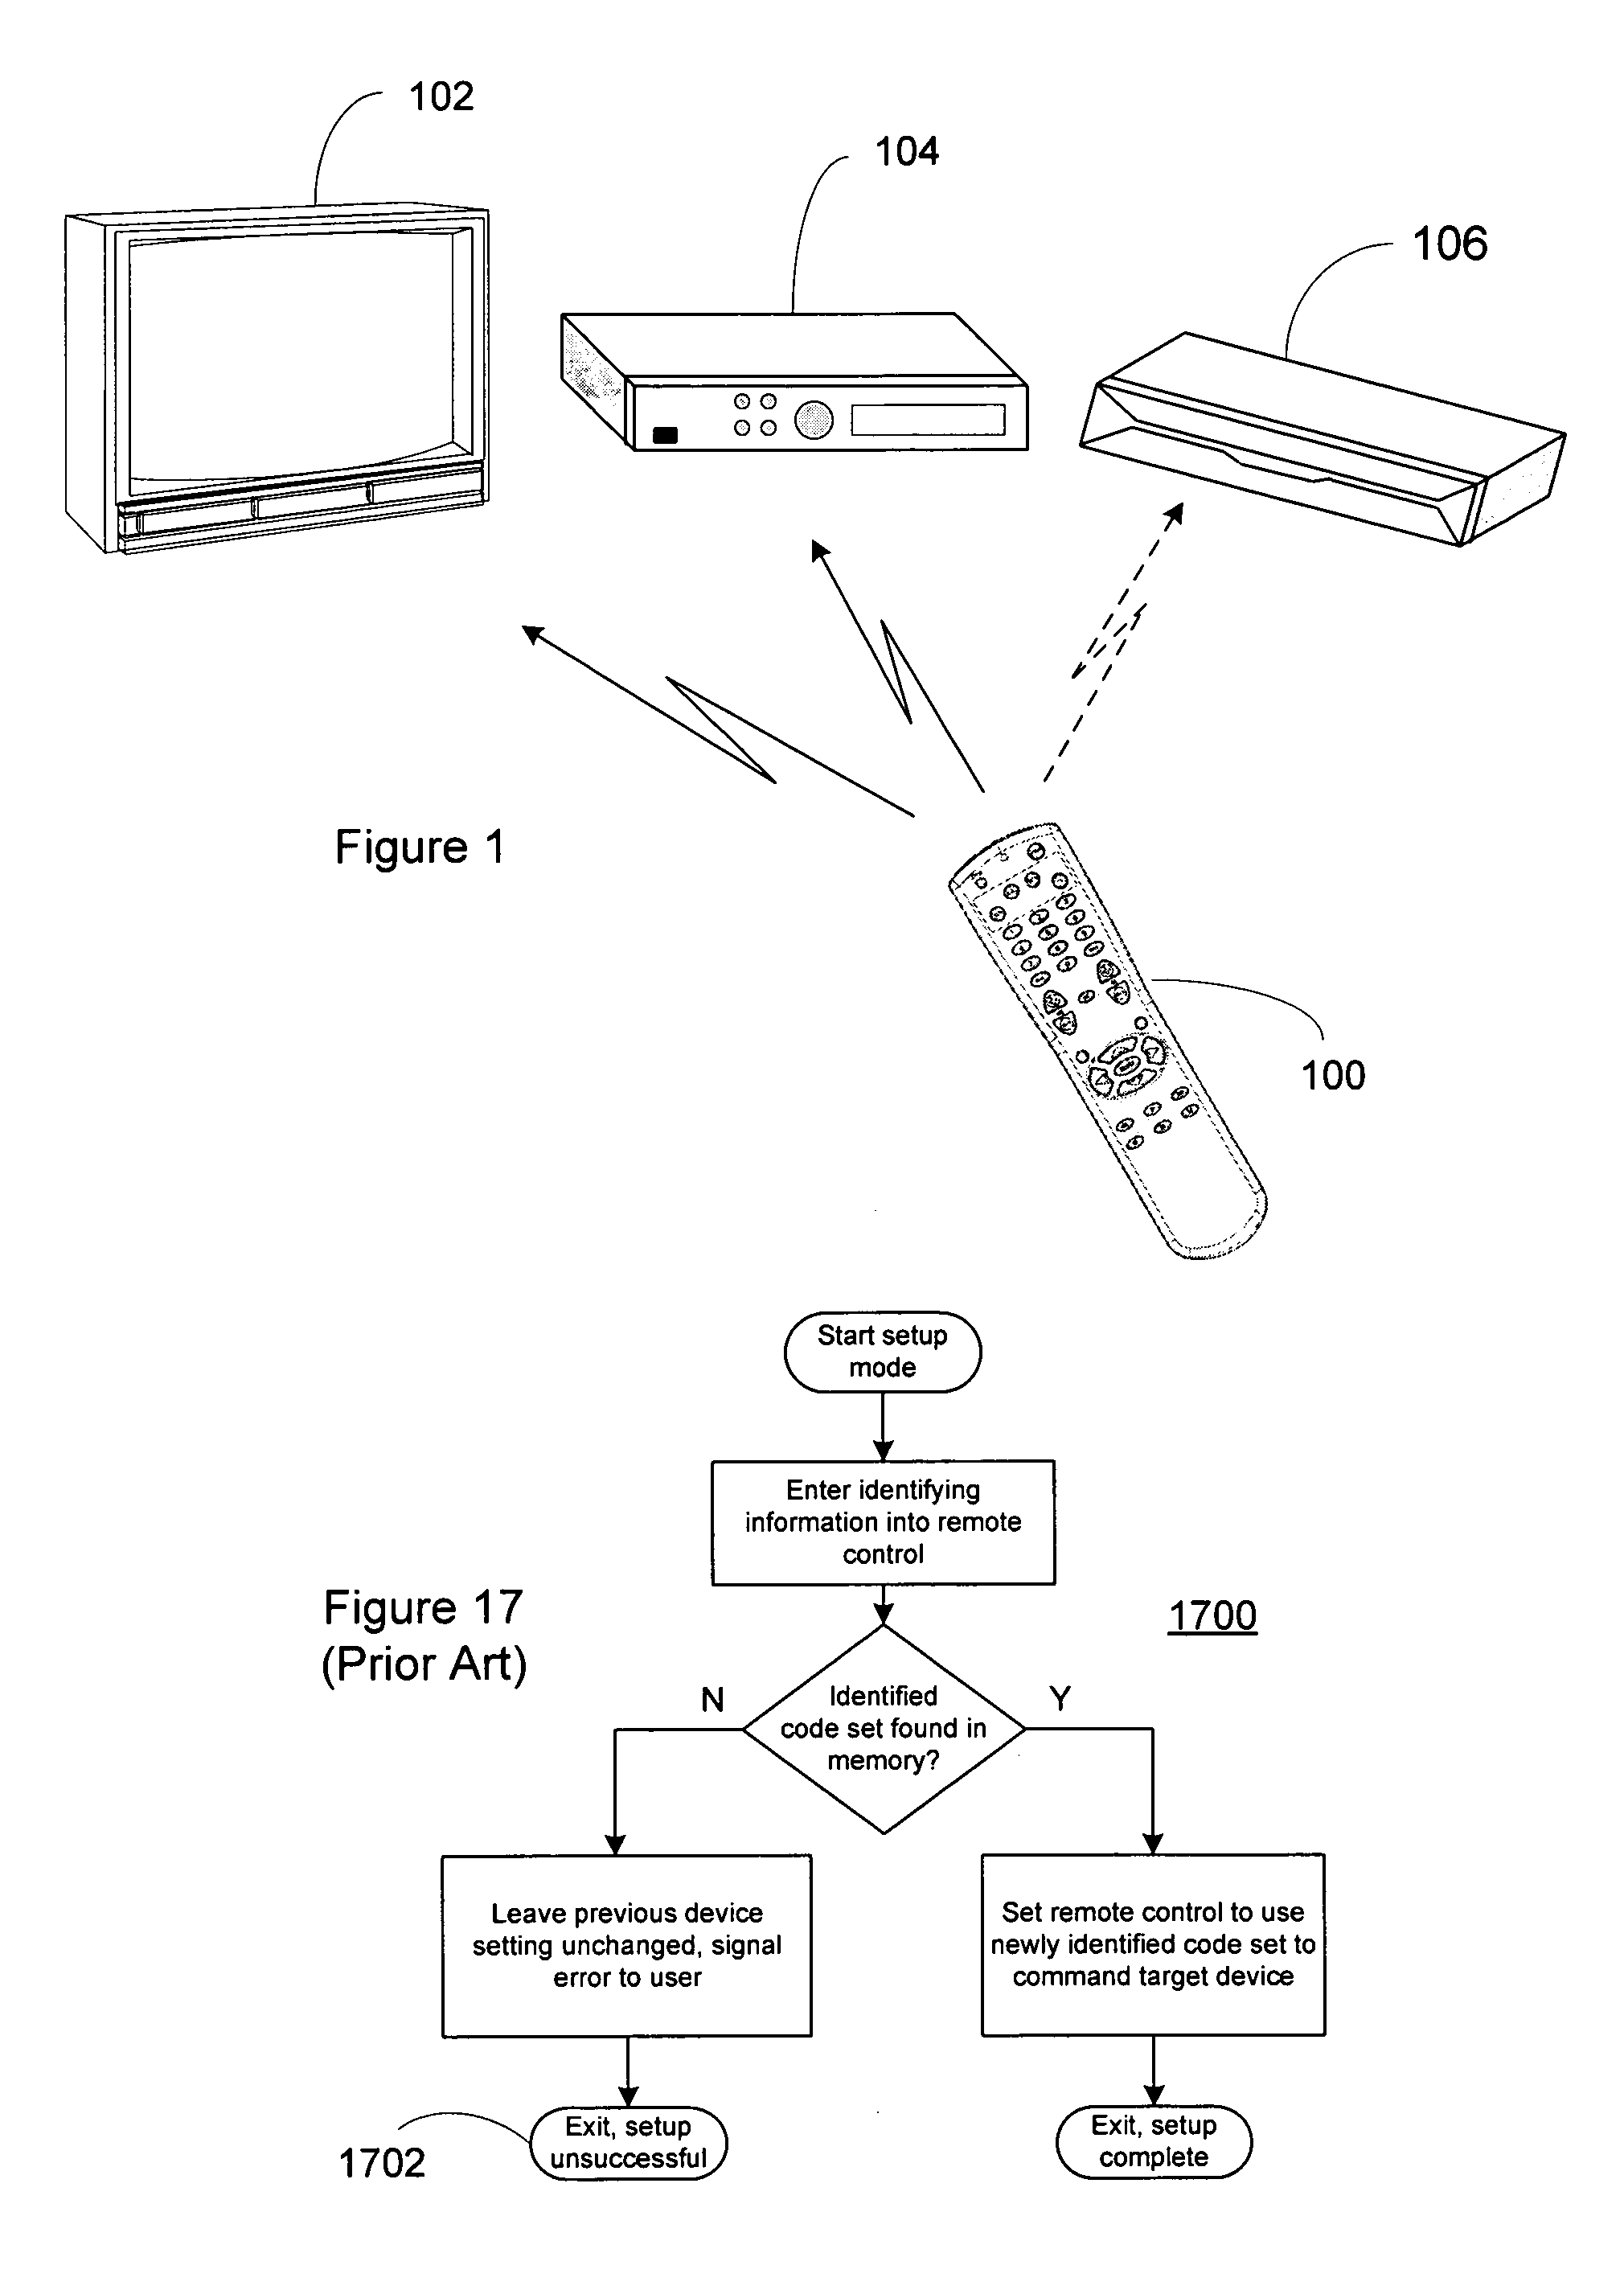 System and method for defining a controlled device command set